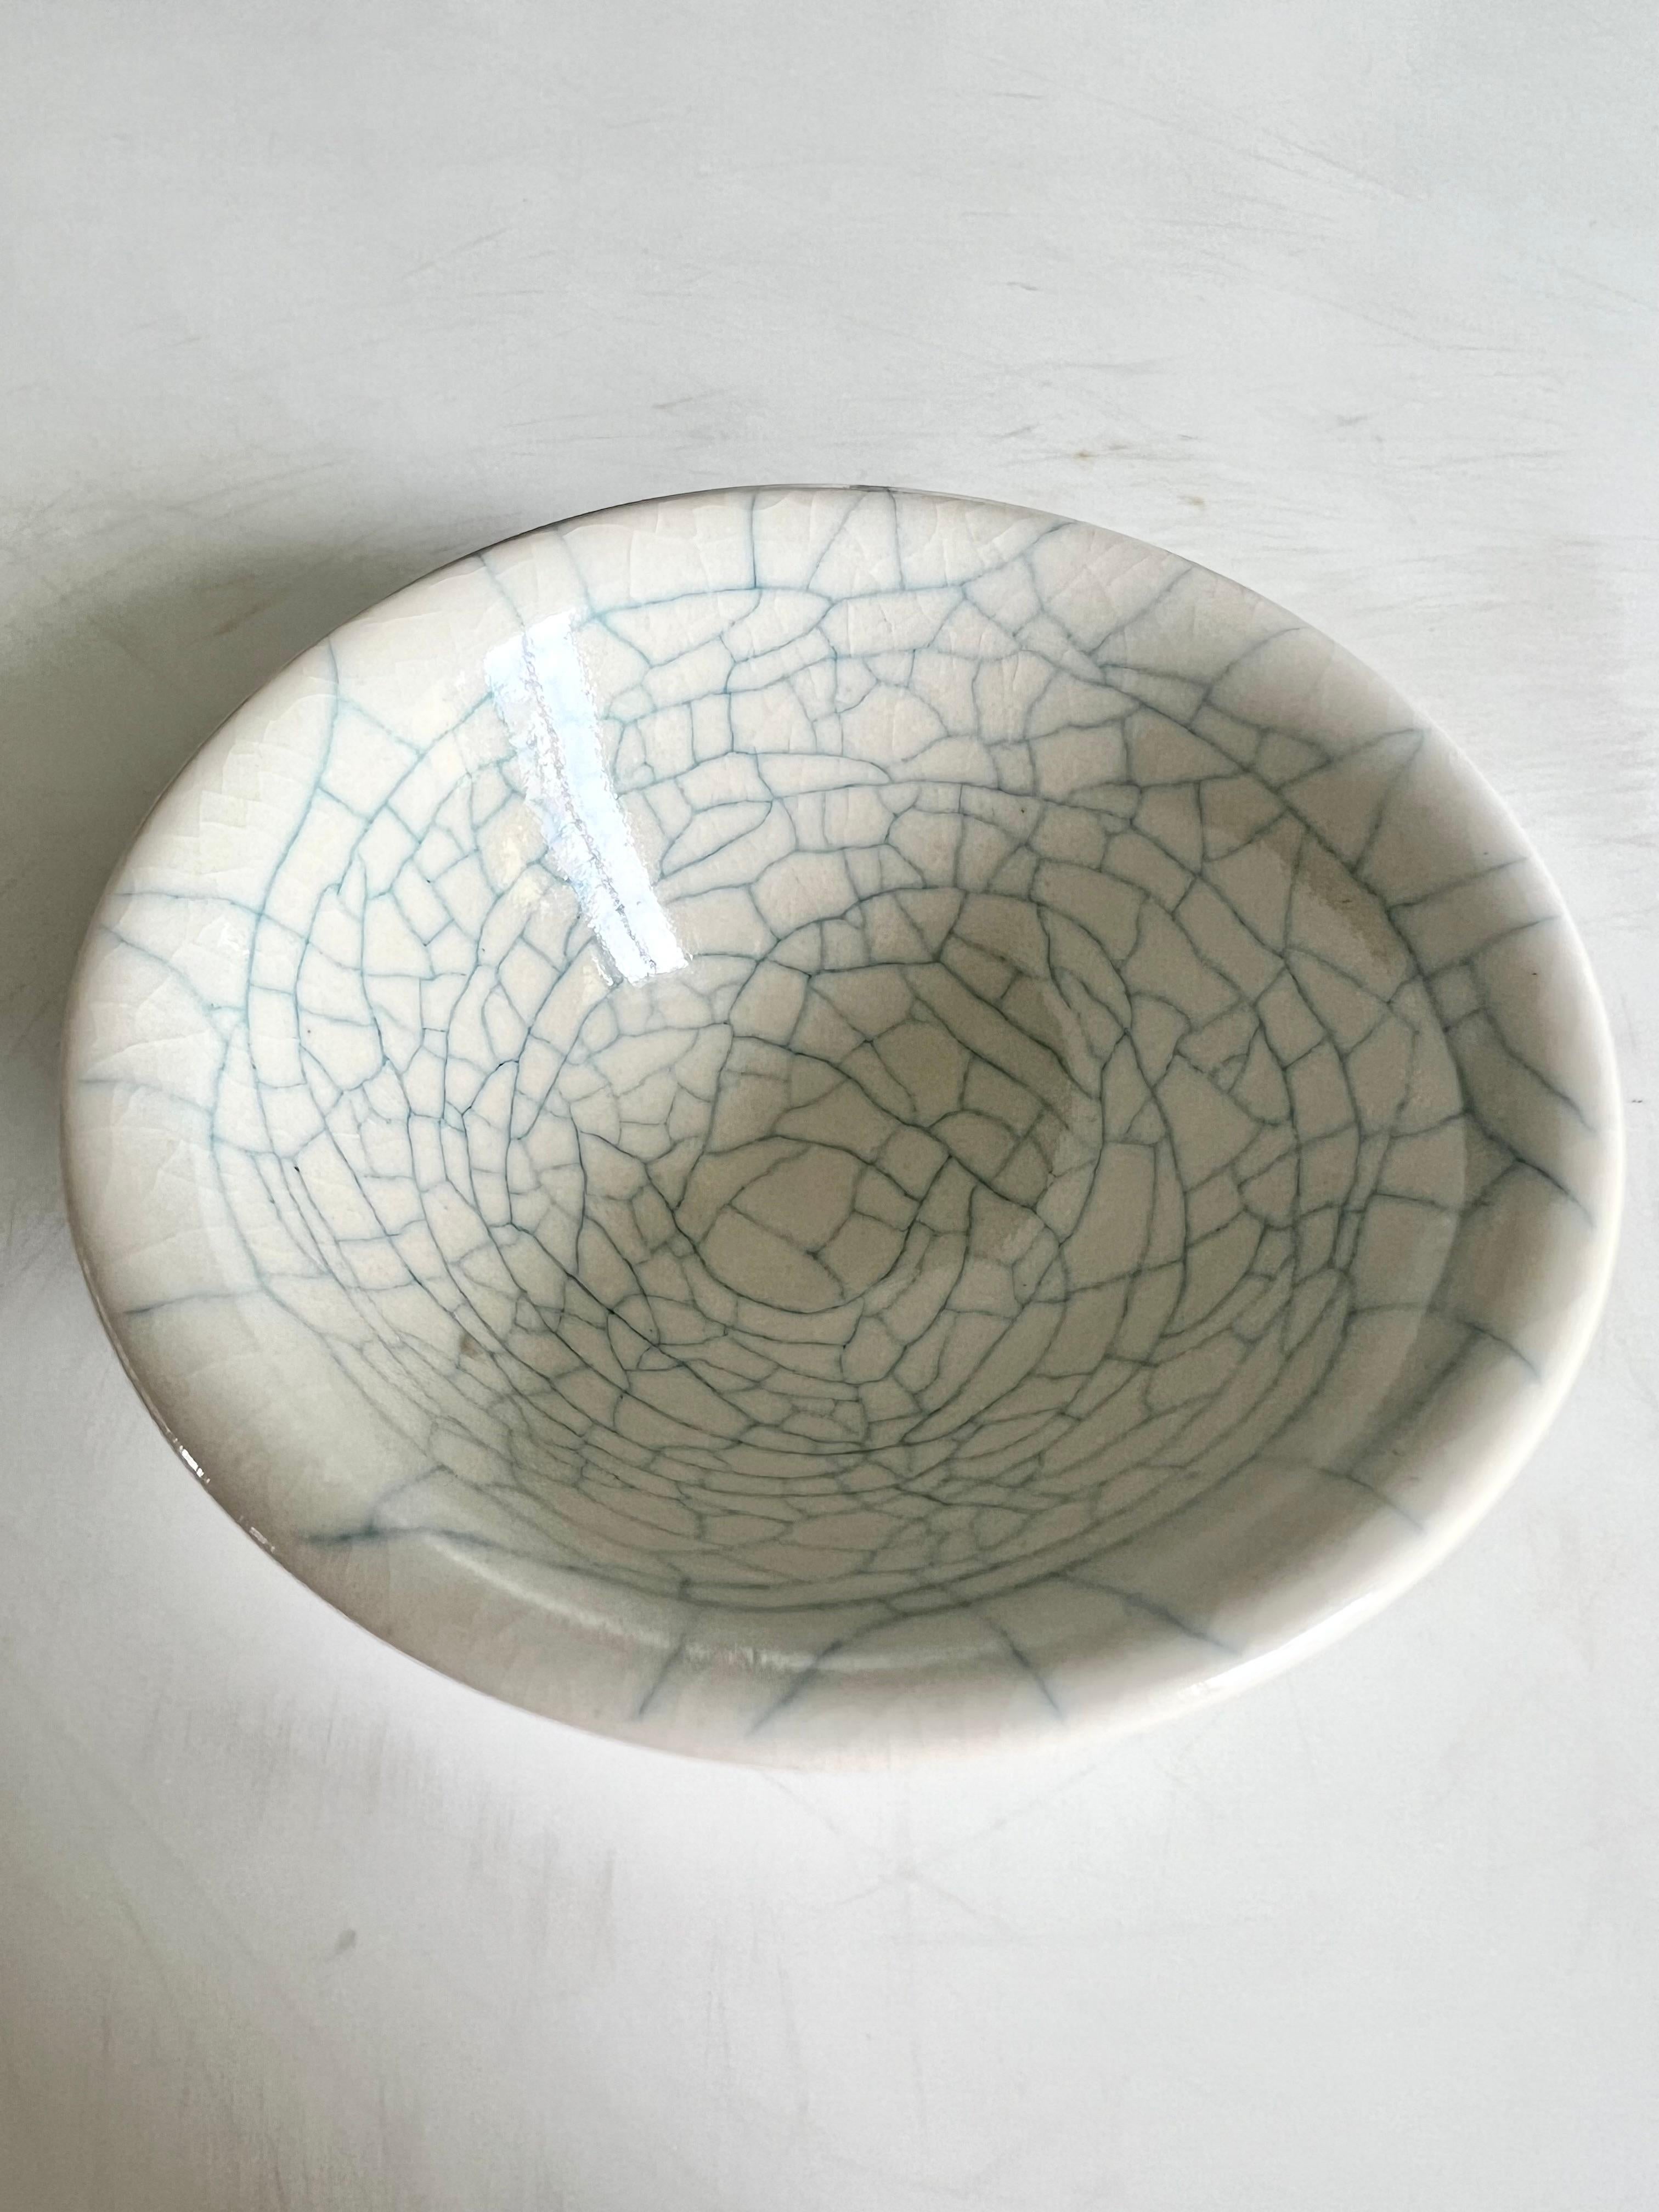 Ceramic 2
Ceramic
8.5cm in diameter, 3.9cm in height

Shin-Young Park is a Korean-born New Zealander who moved to Auckland with her family at 16, and to Singapore in 2006. She completed both her BFA in 1998 and MFA in 2003 at the Elam School of Fine